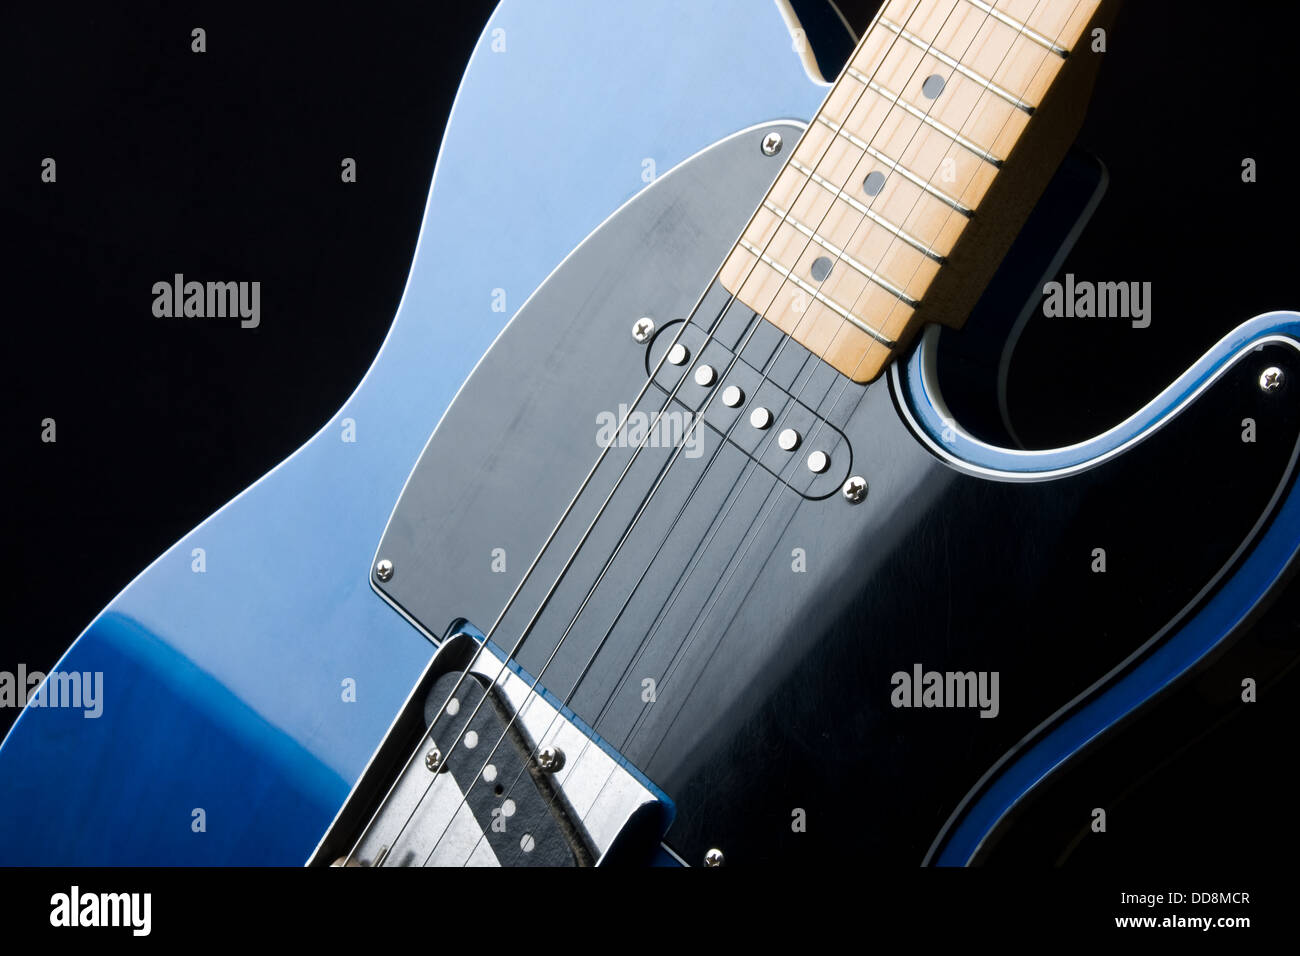 Section of an electric guitar body and neck in close-up. Stock Photo